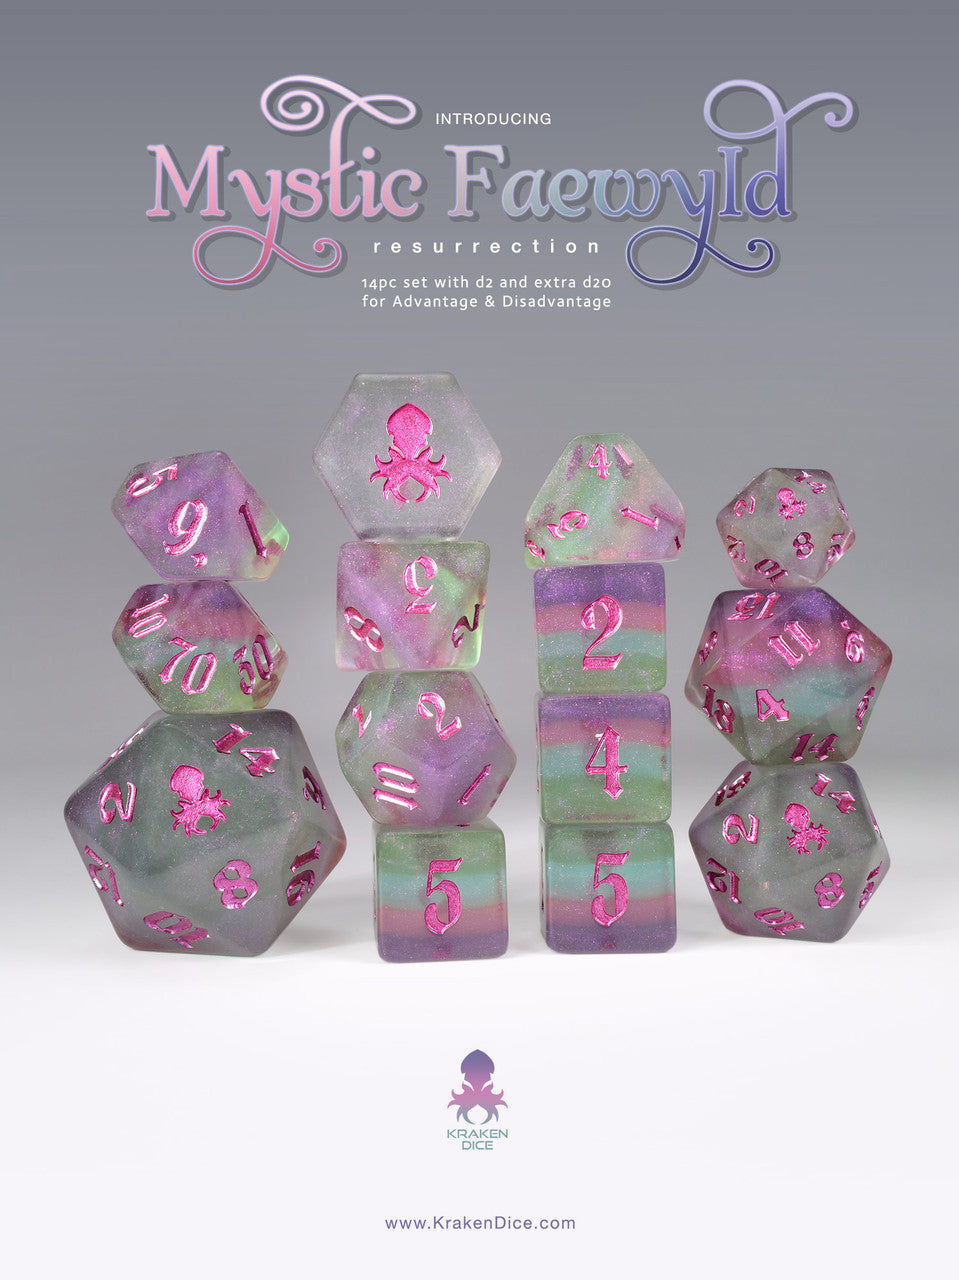 Mystic Faewyld: Resurrection 14pc Polyhedral Dice set with Purple Ink